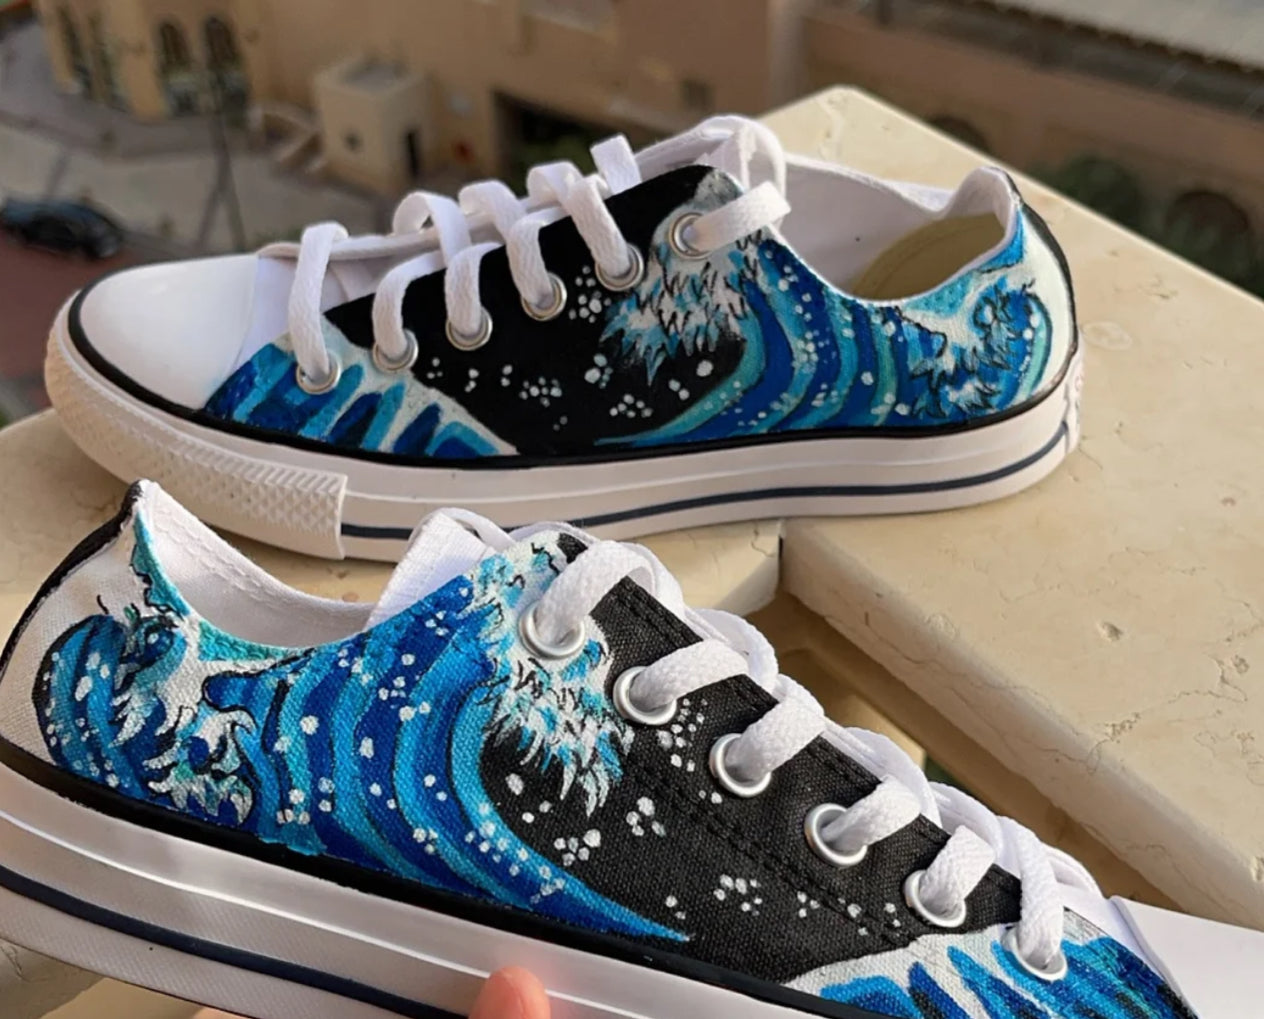 Custom nation shoes-converse(waves)